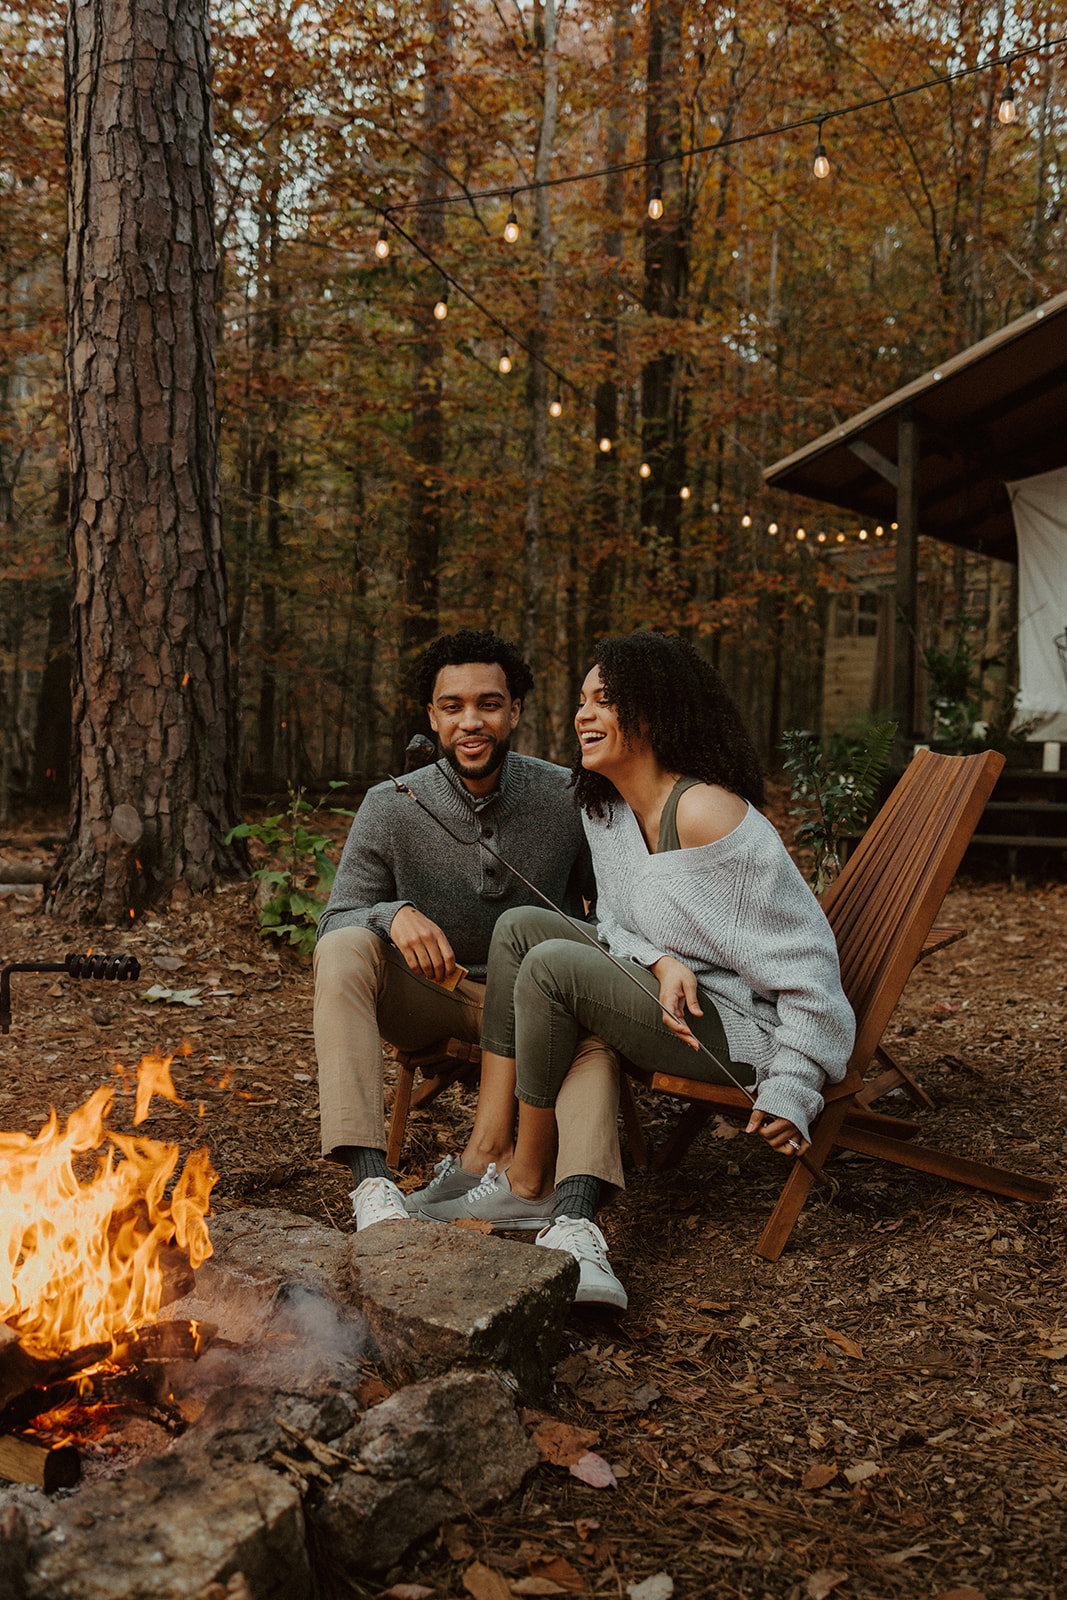 the couple sitting by the campfire